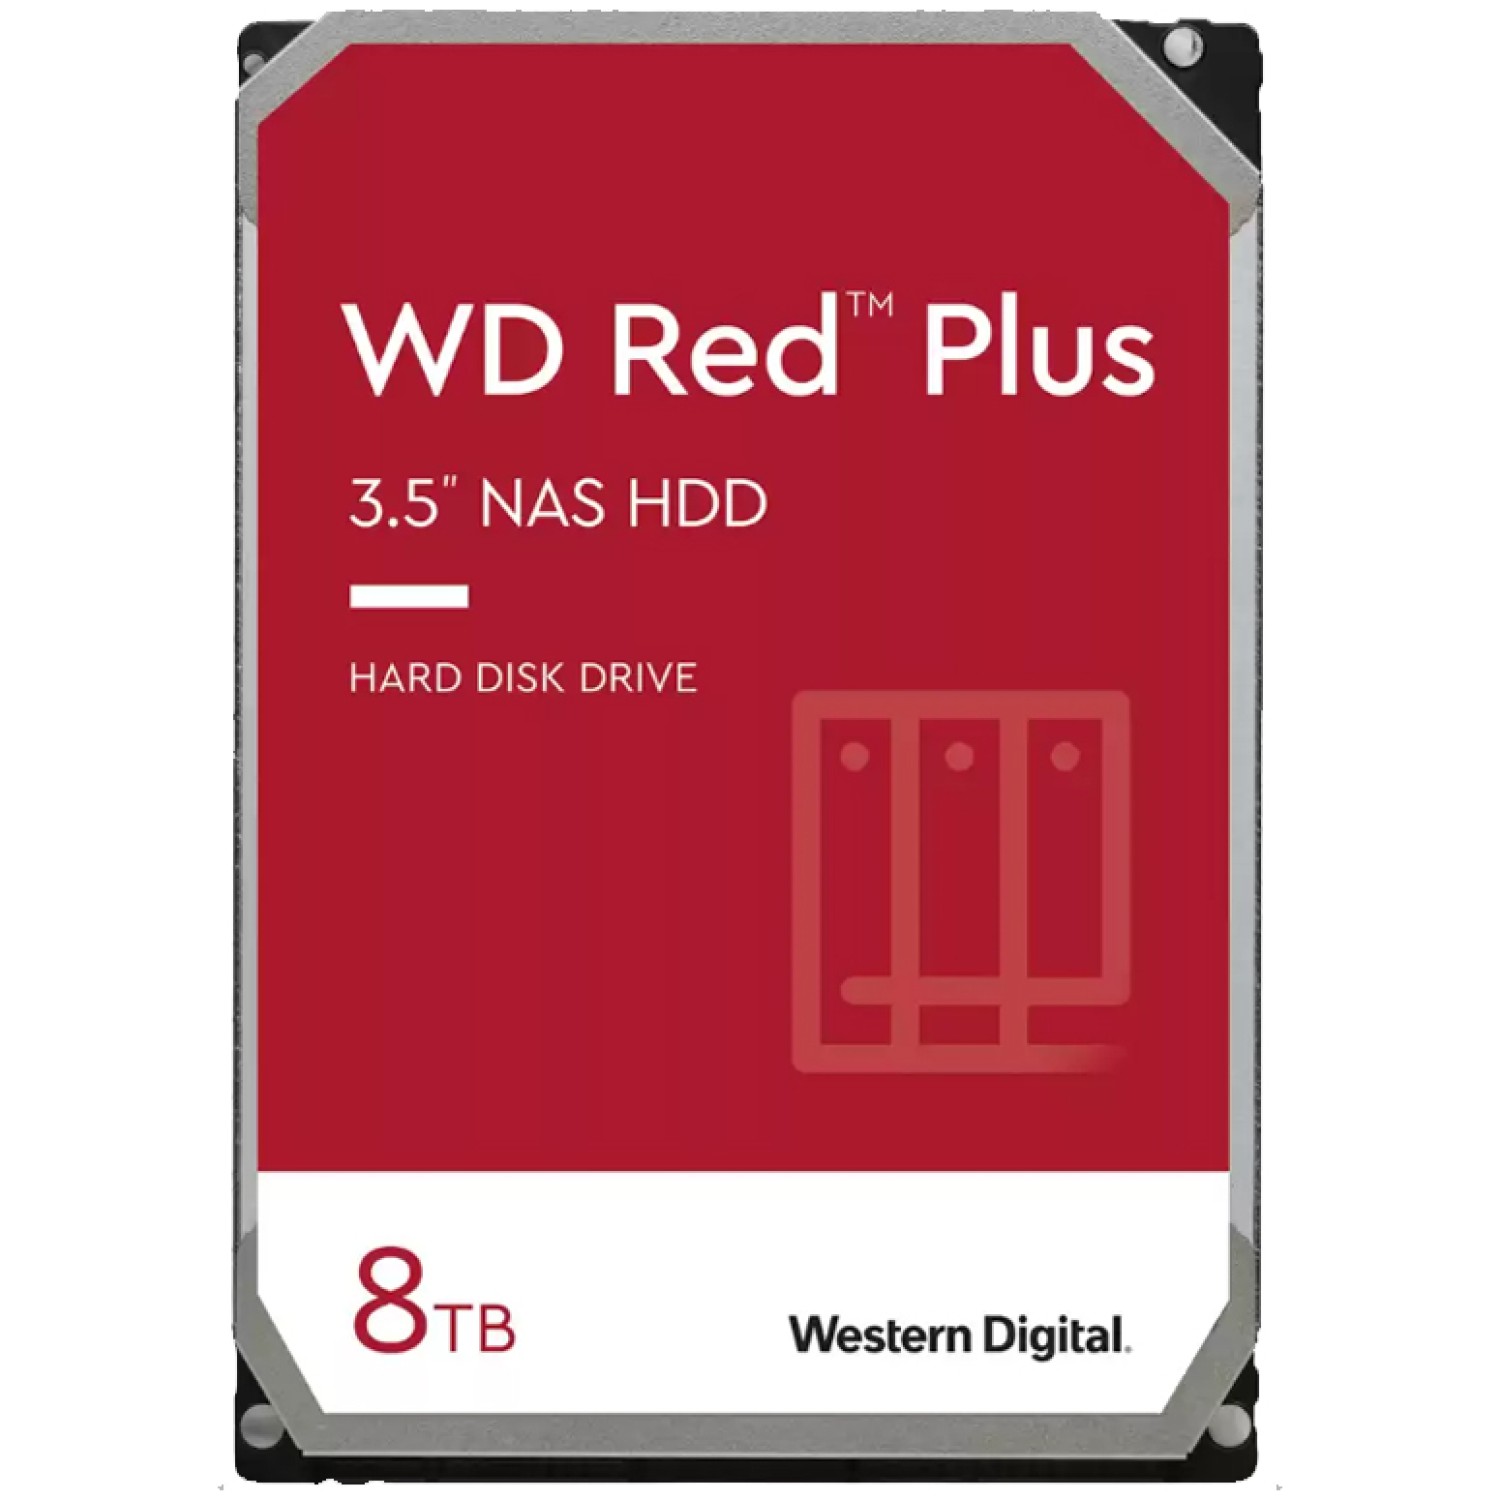 WD Red Plus 8TB 3